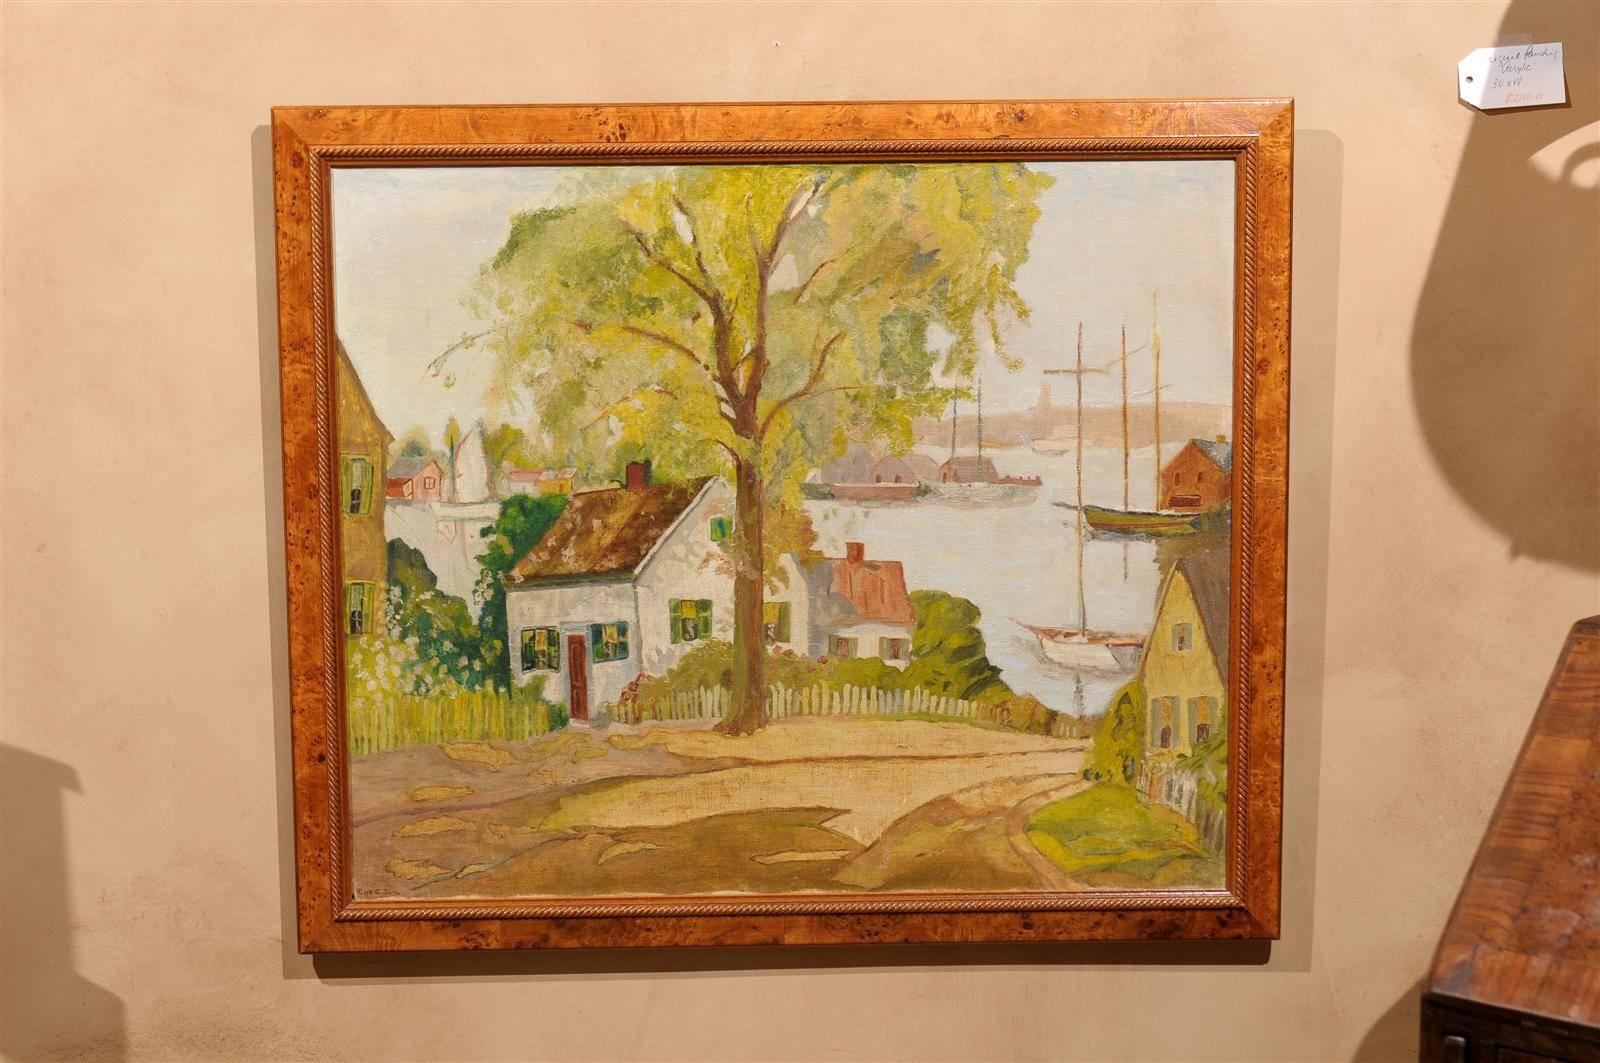 An oil on canvas. A very cottagy sea village landscape with sailboats in the distance.  A little primitive and painted in soft colors, extremely peaceful. The frame is made from burl wood. It is signed but illegibly.